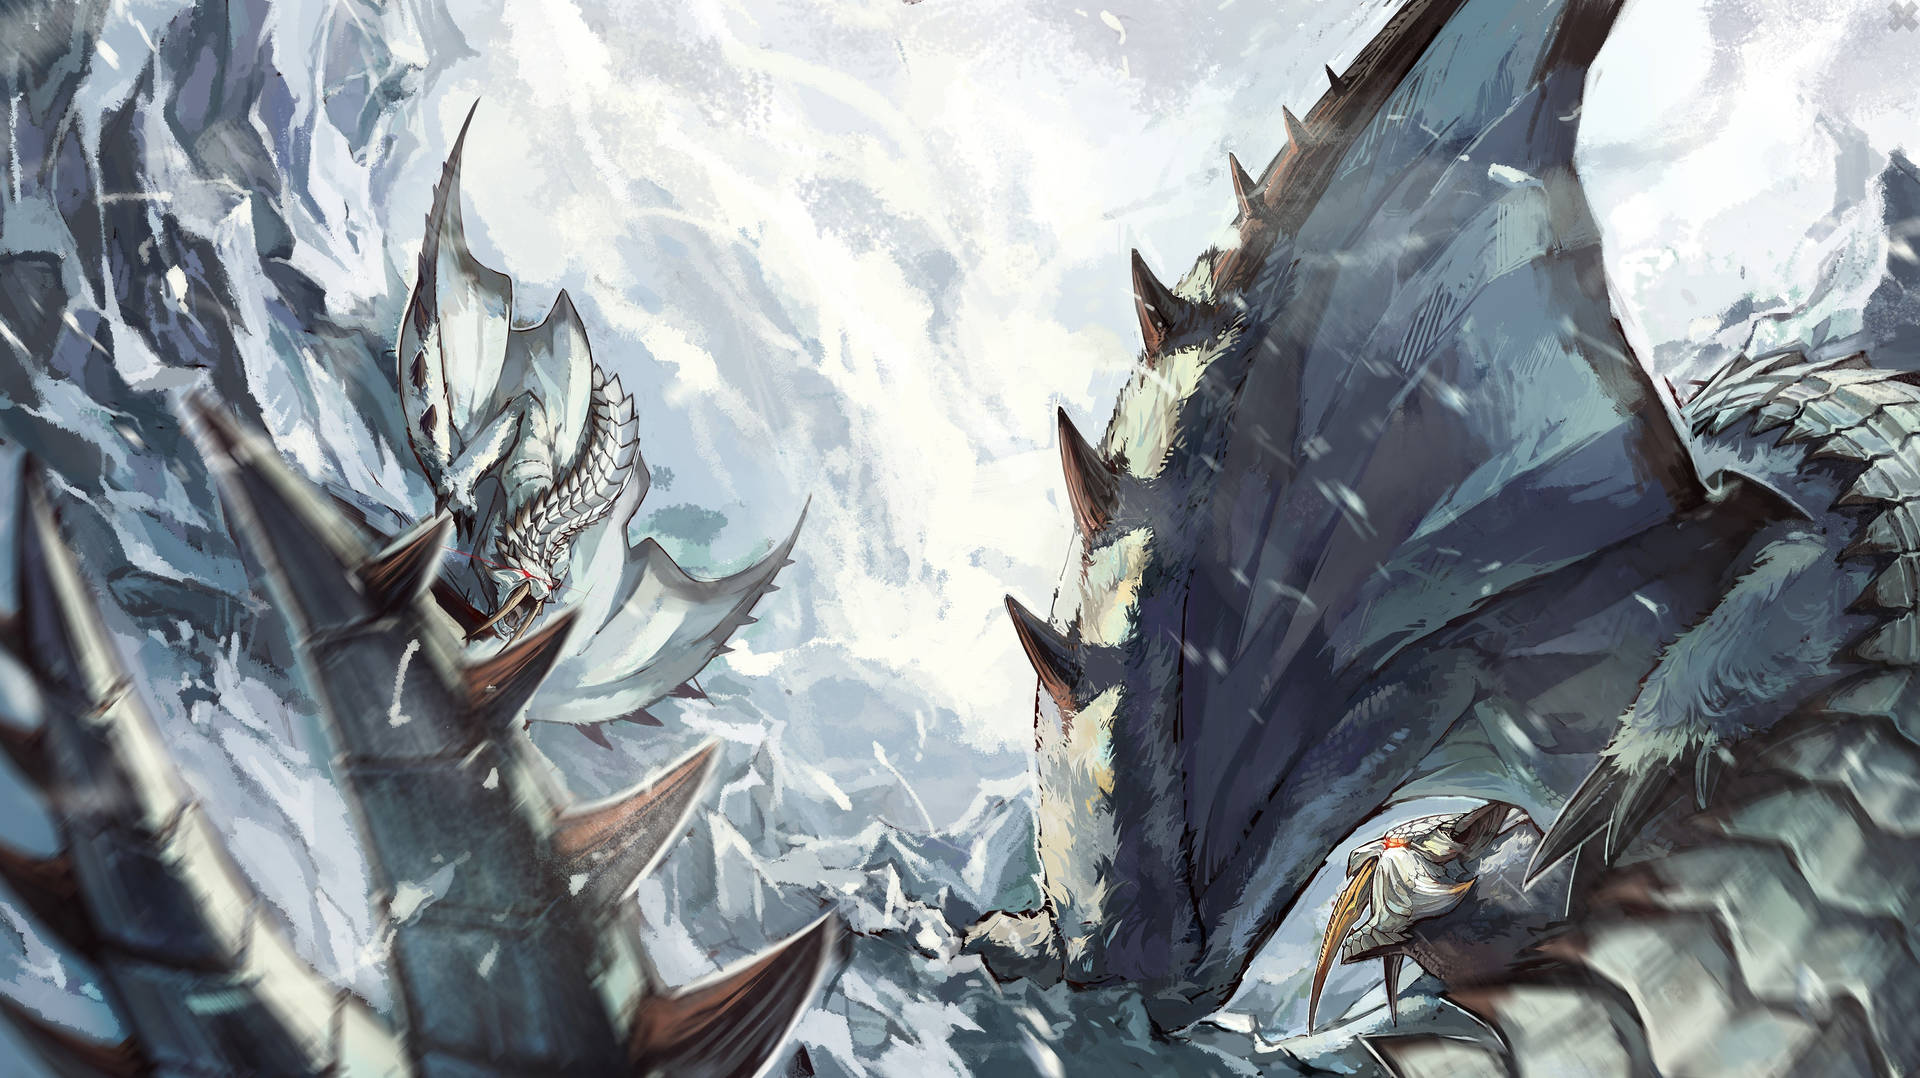 “Slaying The Barioth in Monster Hunter” Wallpaper